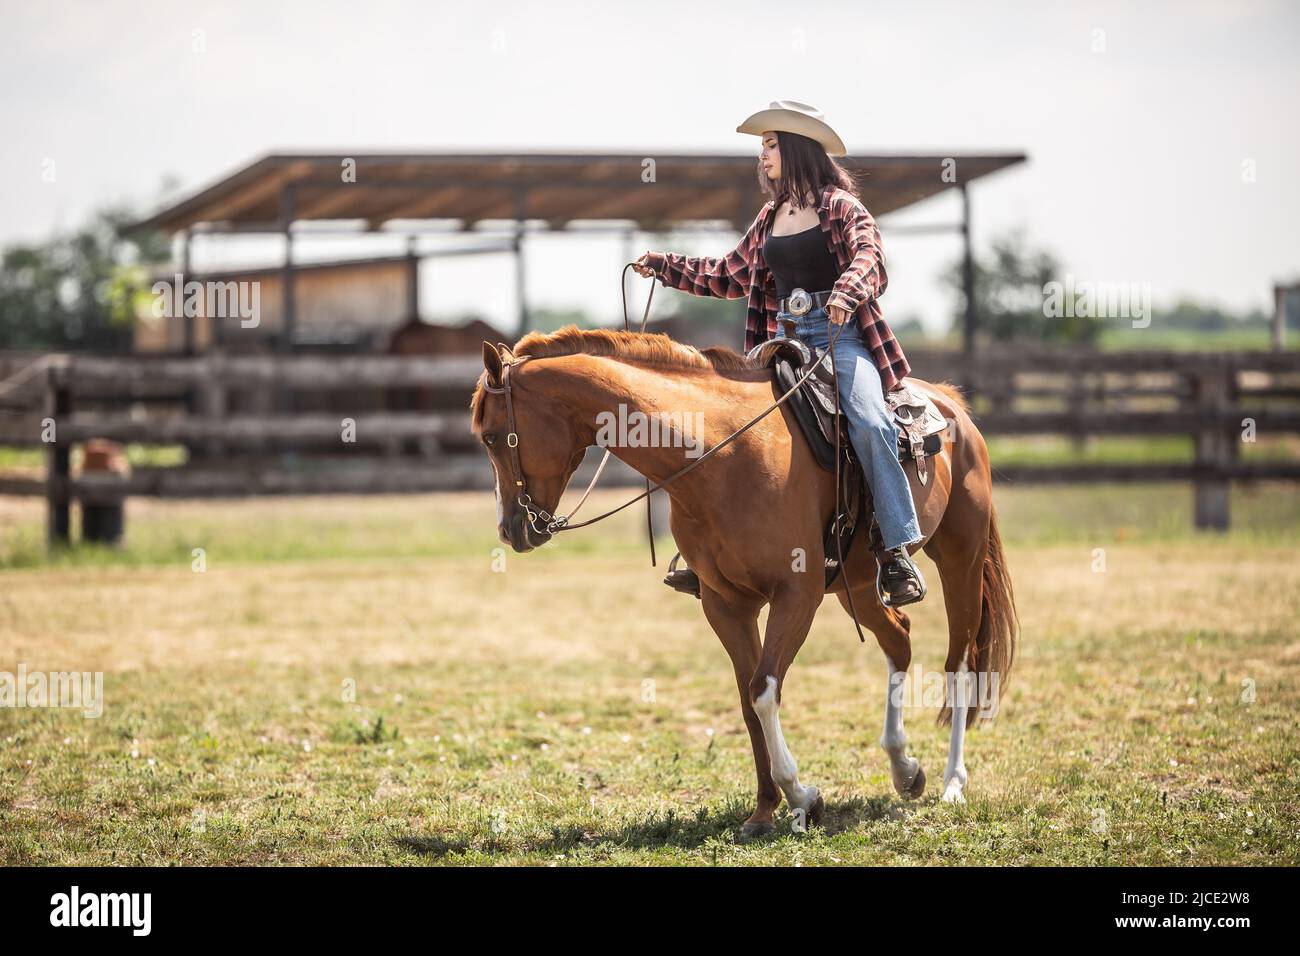 Young cowgirl leads her horse during a ride on a ranch. Stock Photo